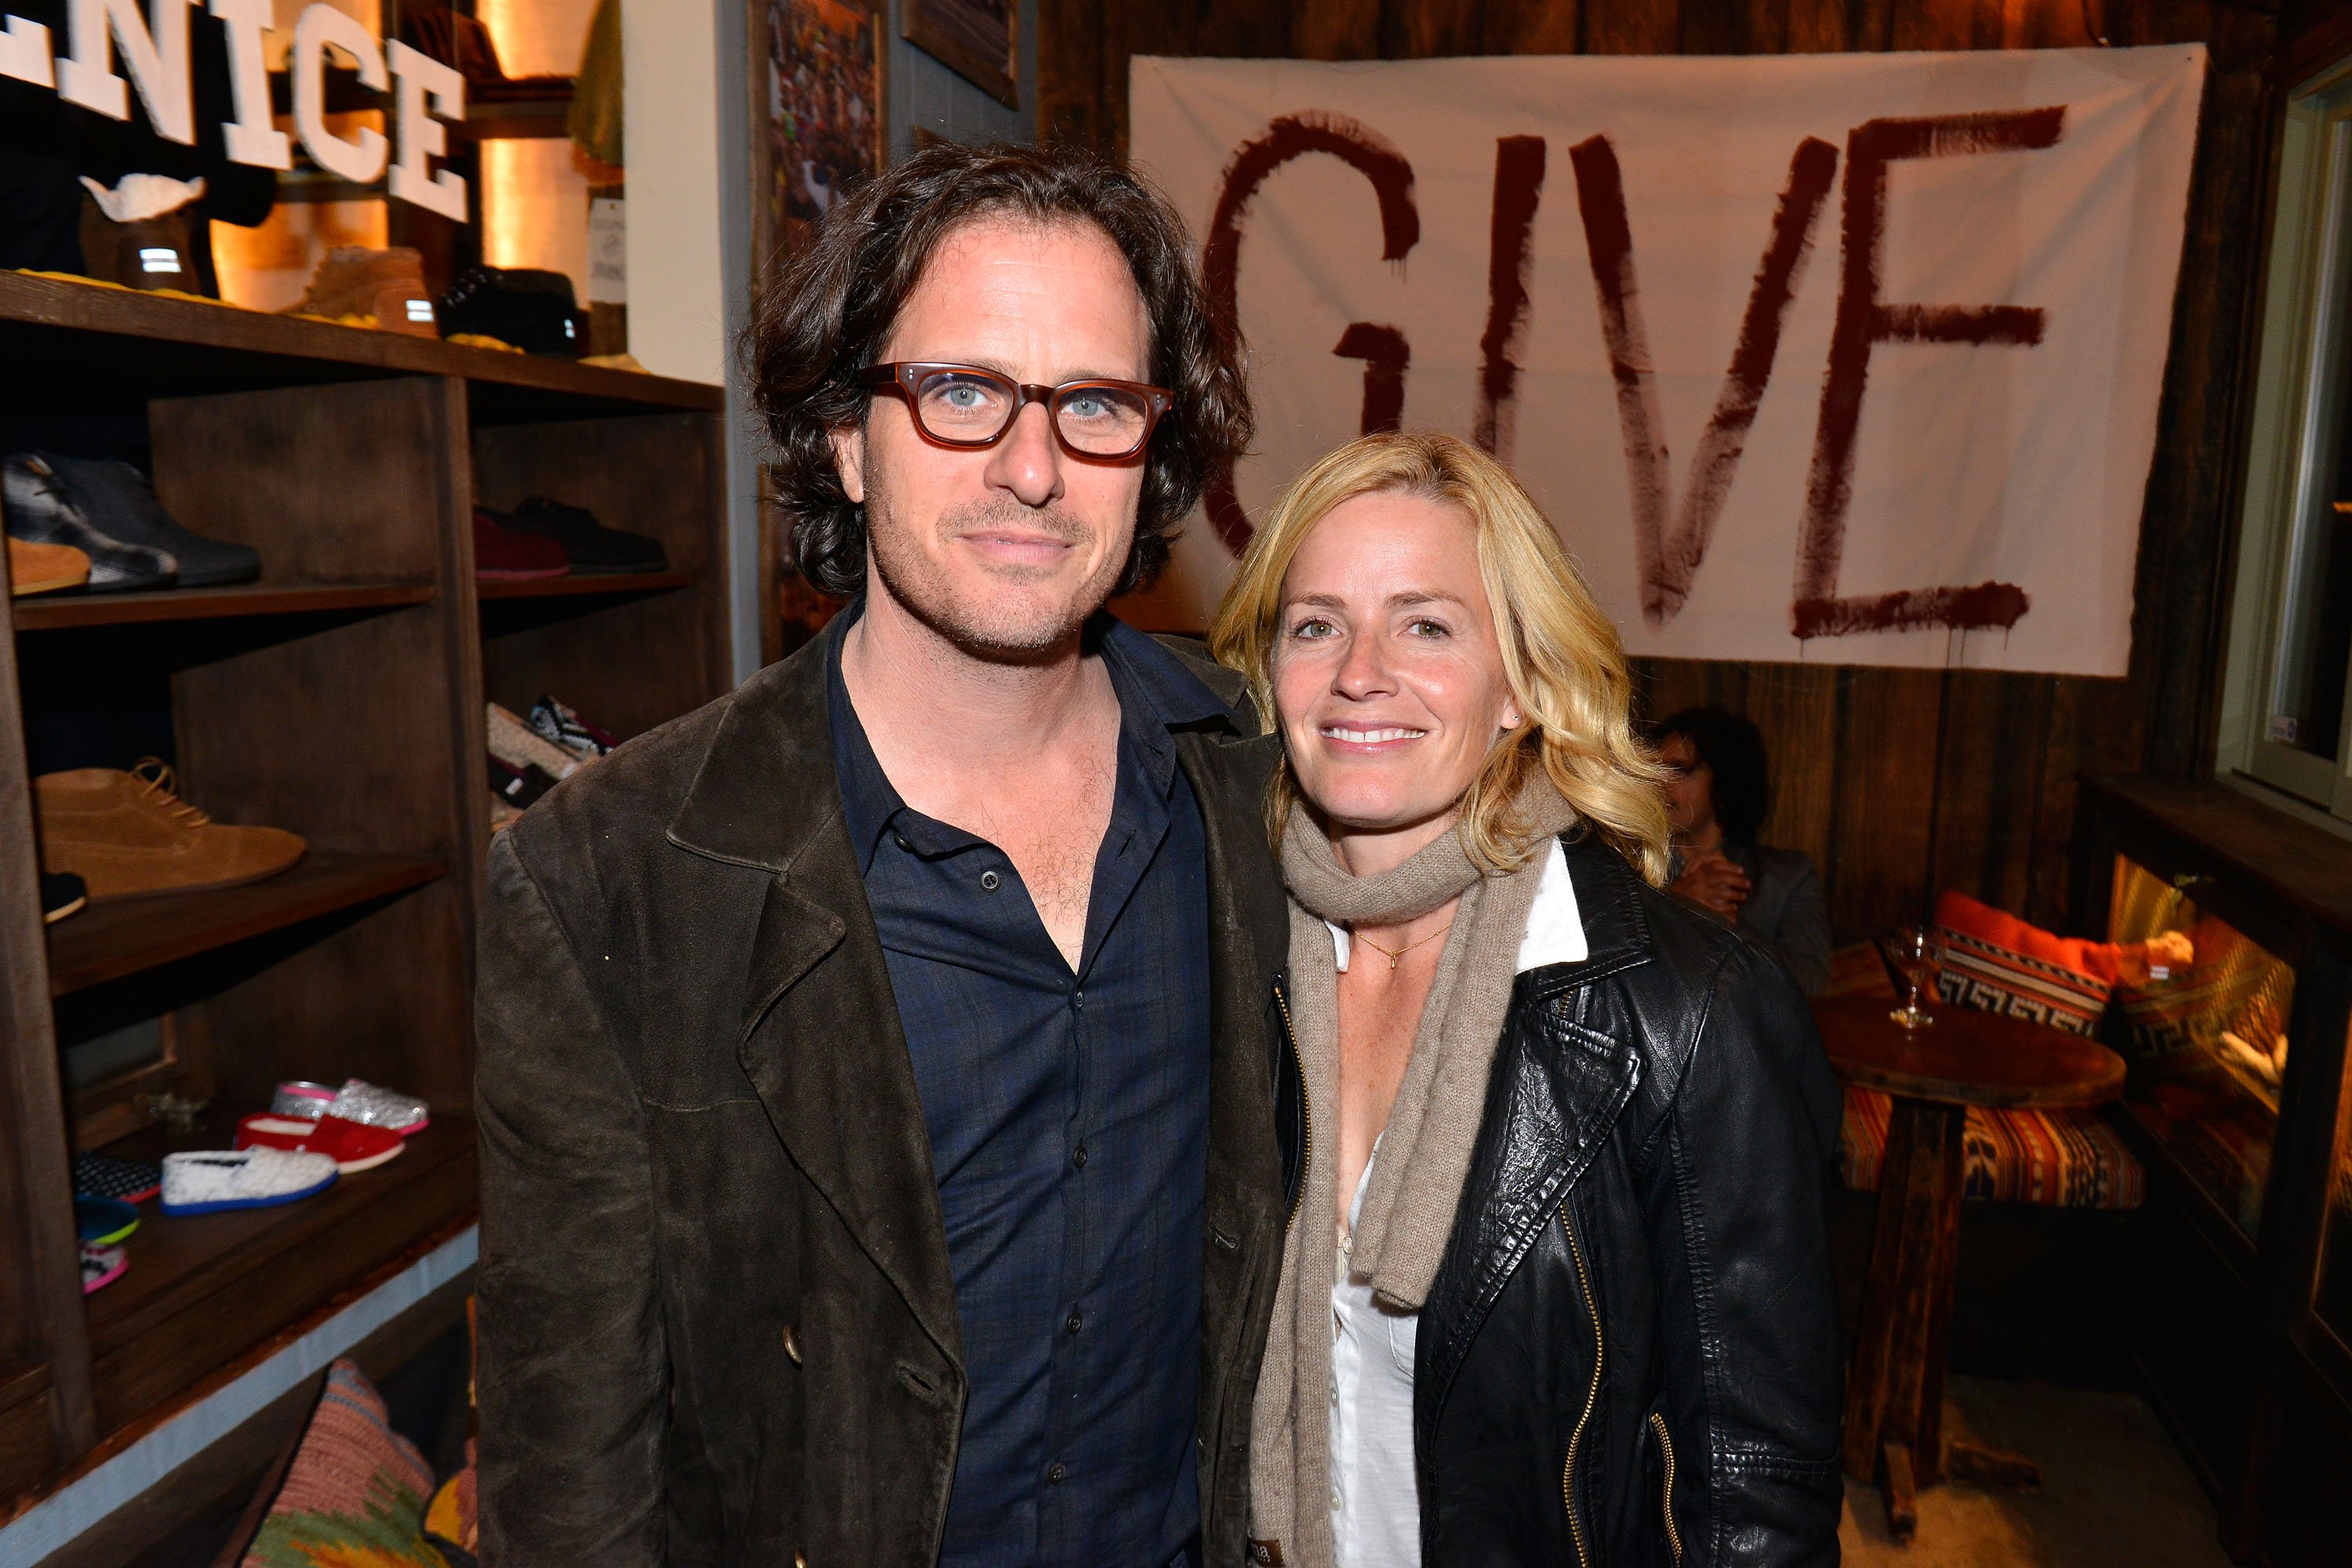 Davis Guggenheim and actress Elisabeth Shue attend the Grand Opening of TOMS official flagship store on December 17, 2012, in Venice, California. | Source: Getty Images.